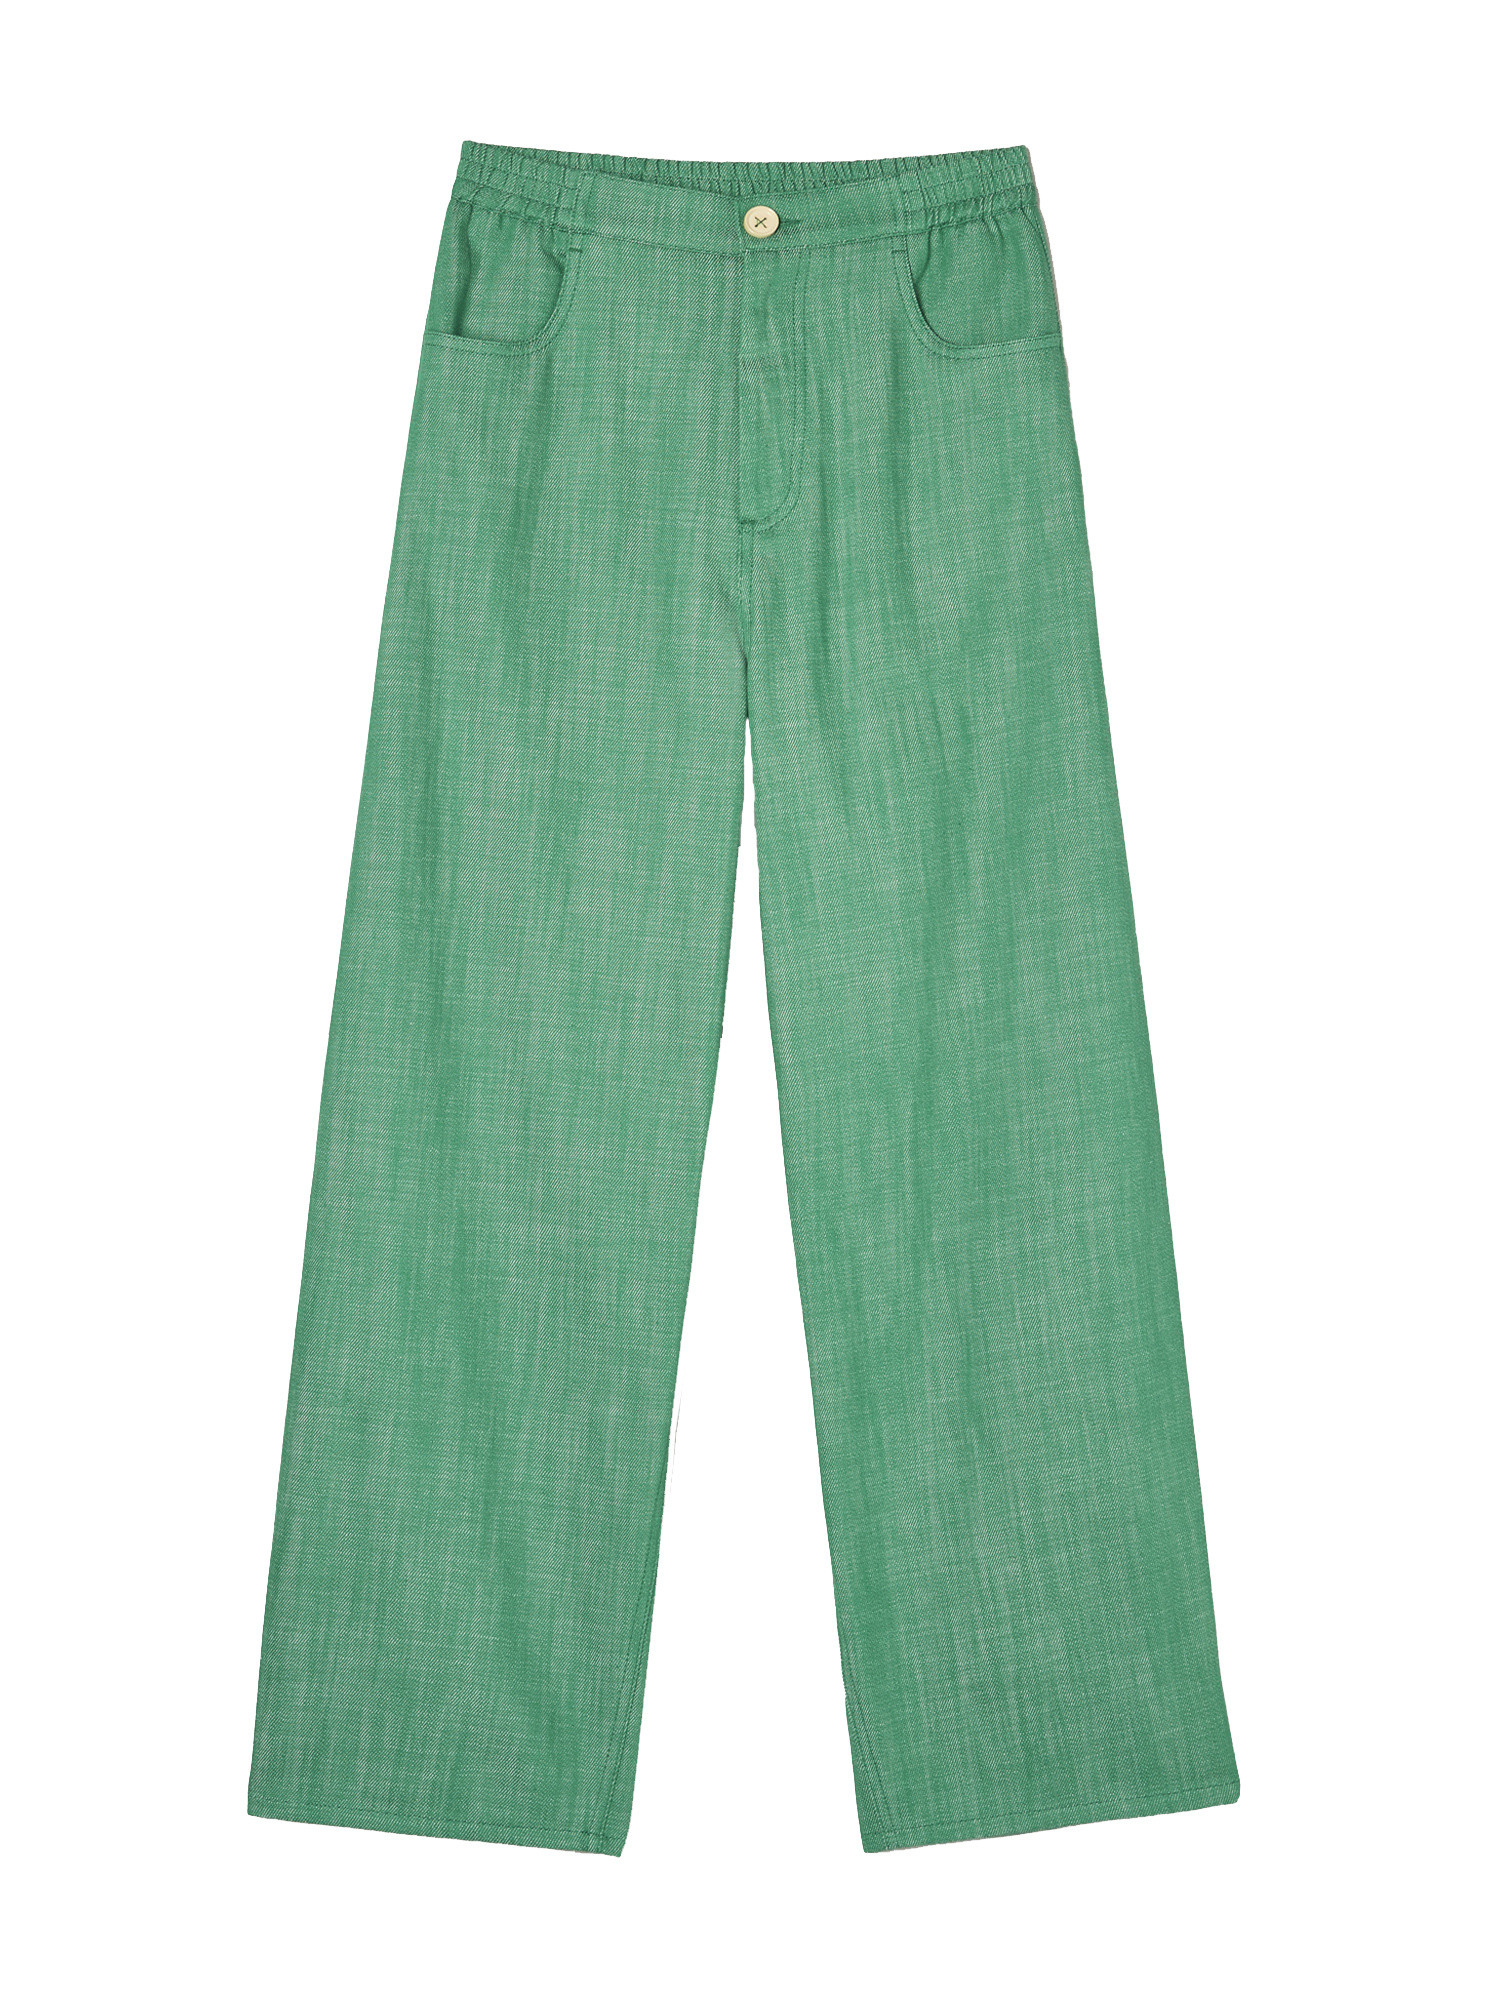 Attic and Barn - Cortina trousers in cotton, Green, large image number 0